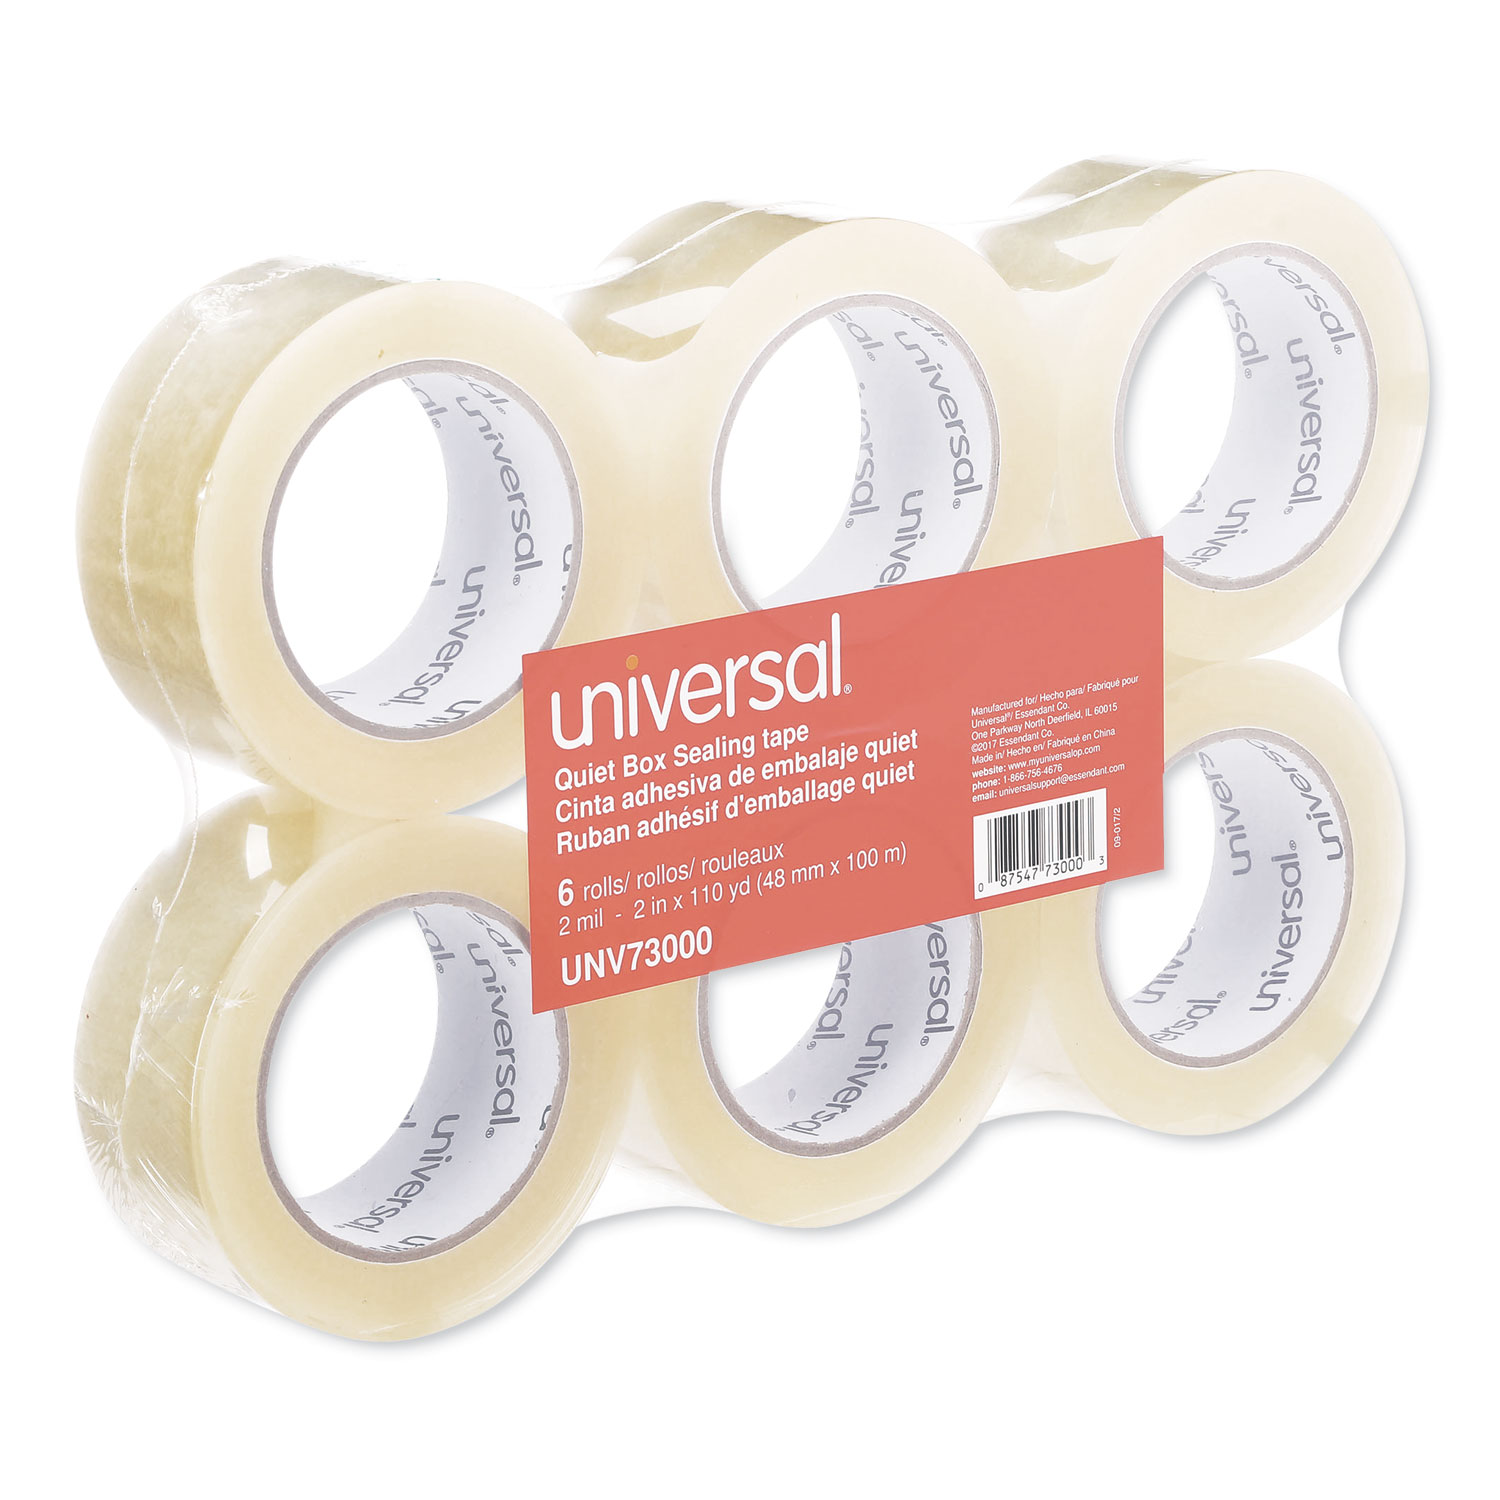 Quiet Tape Box Sealing Tape, 3" Core, 1.88" x 110 yds, Clear, 6/Pack